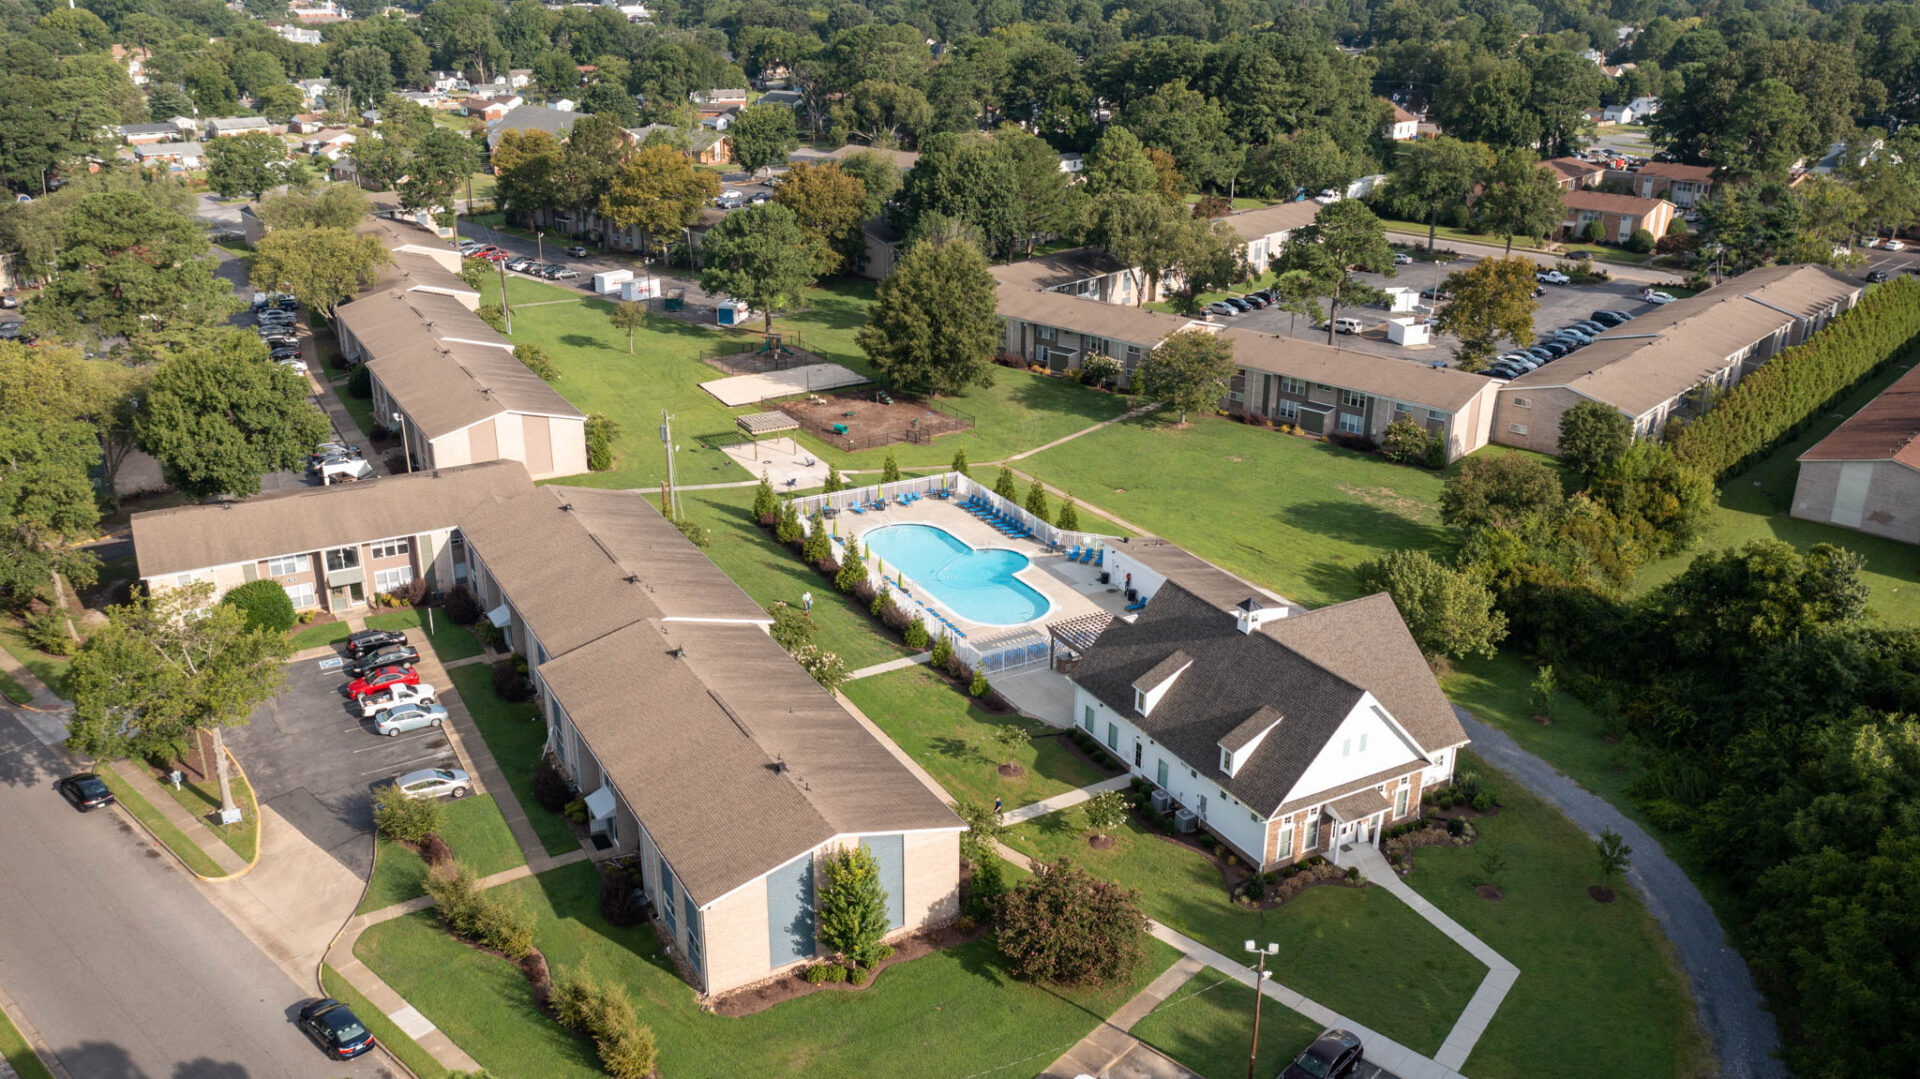 Aerial view of Crawford Farms including pool